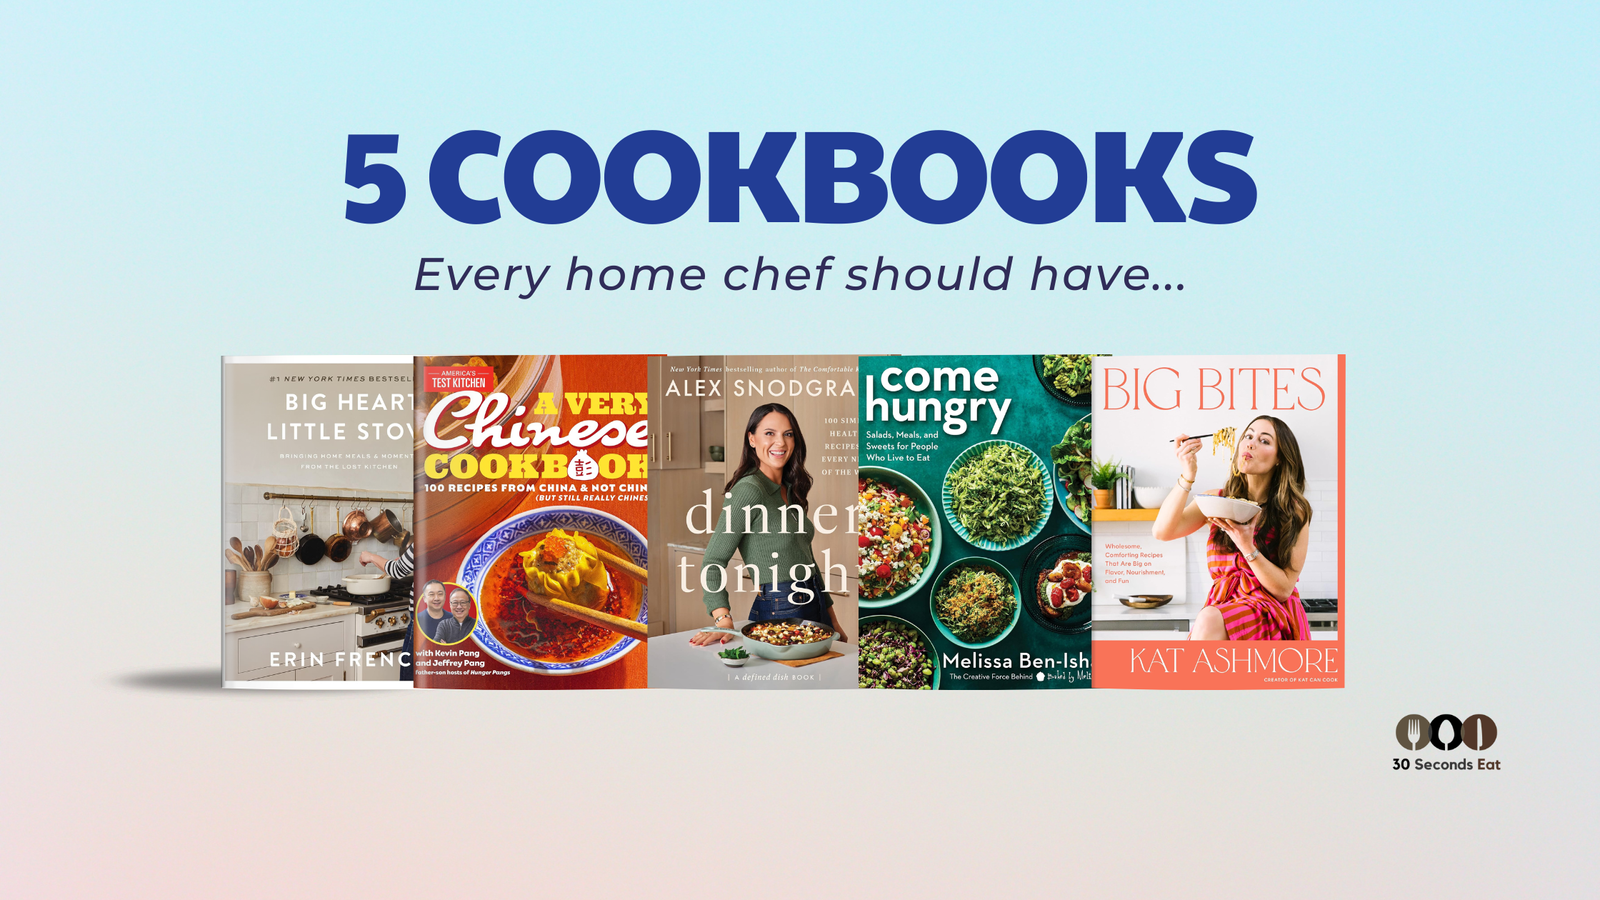 The ultimate 5 cookbooks every home chef should have at home featured image